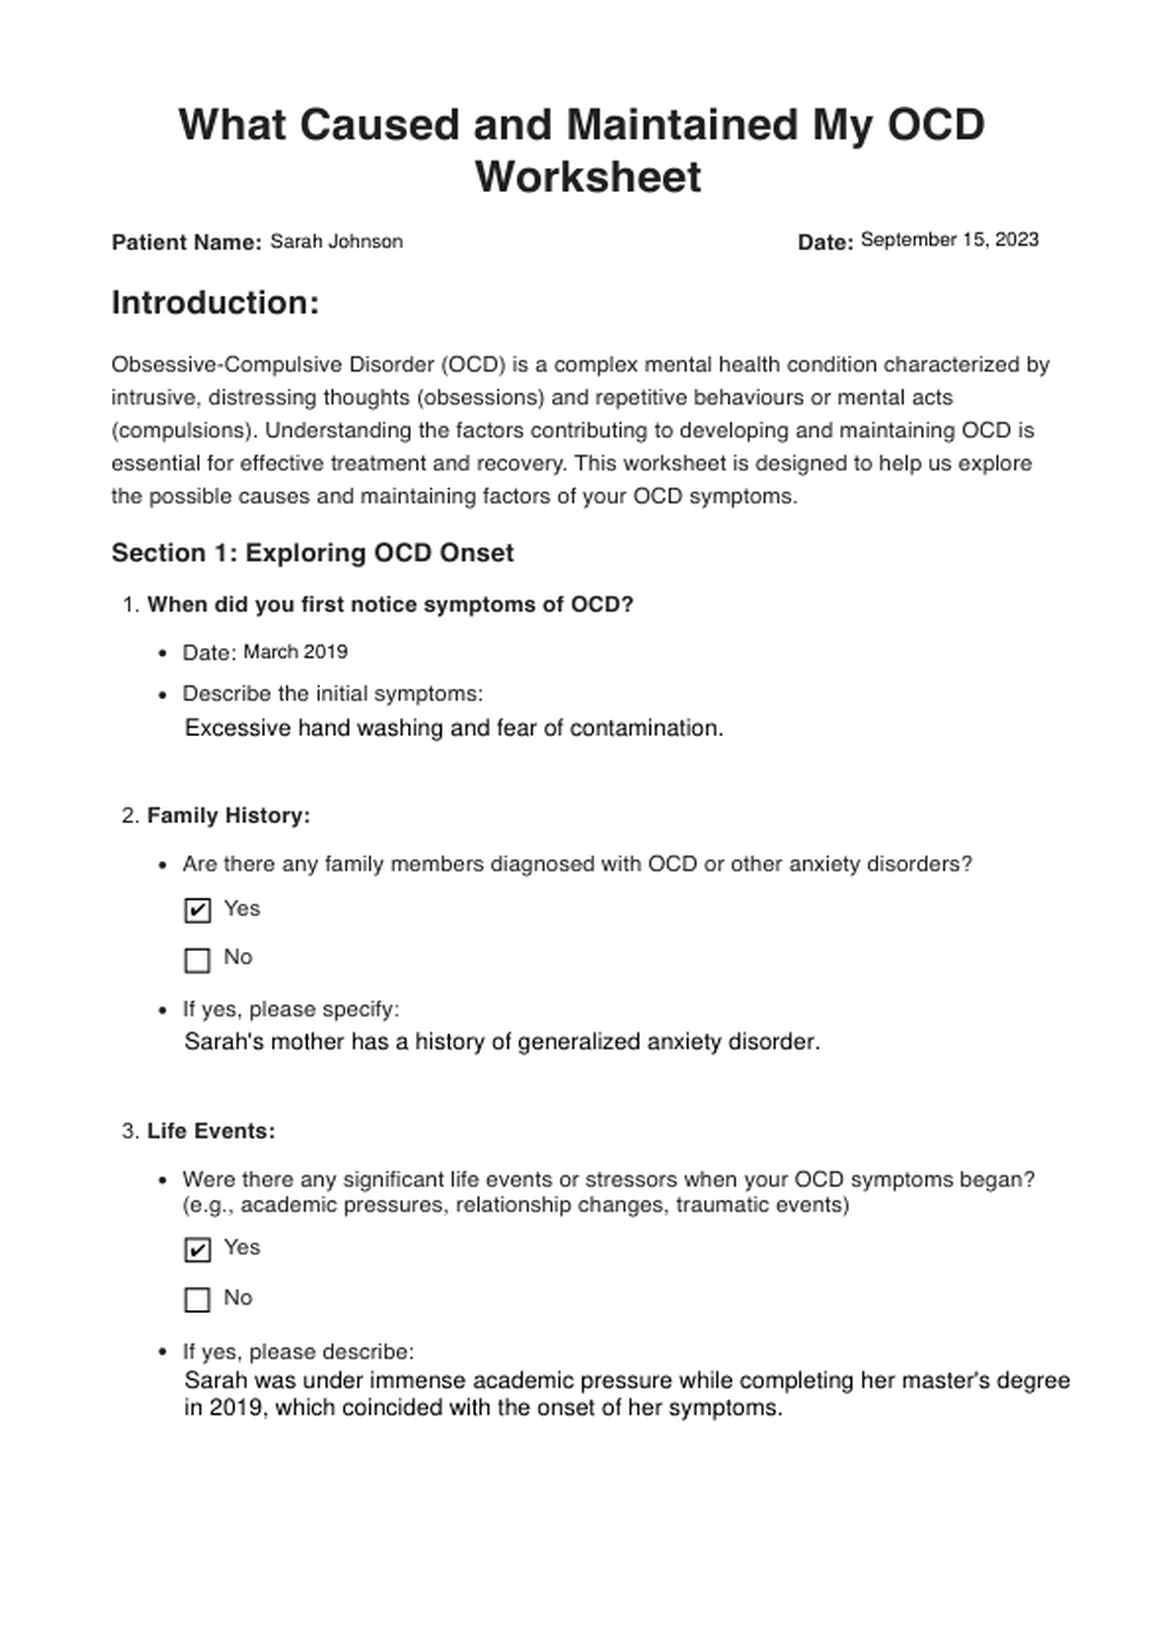 What Caused and Maintains My OCD Worksheet PDF Example